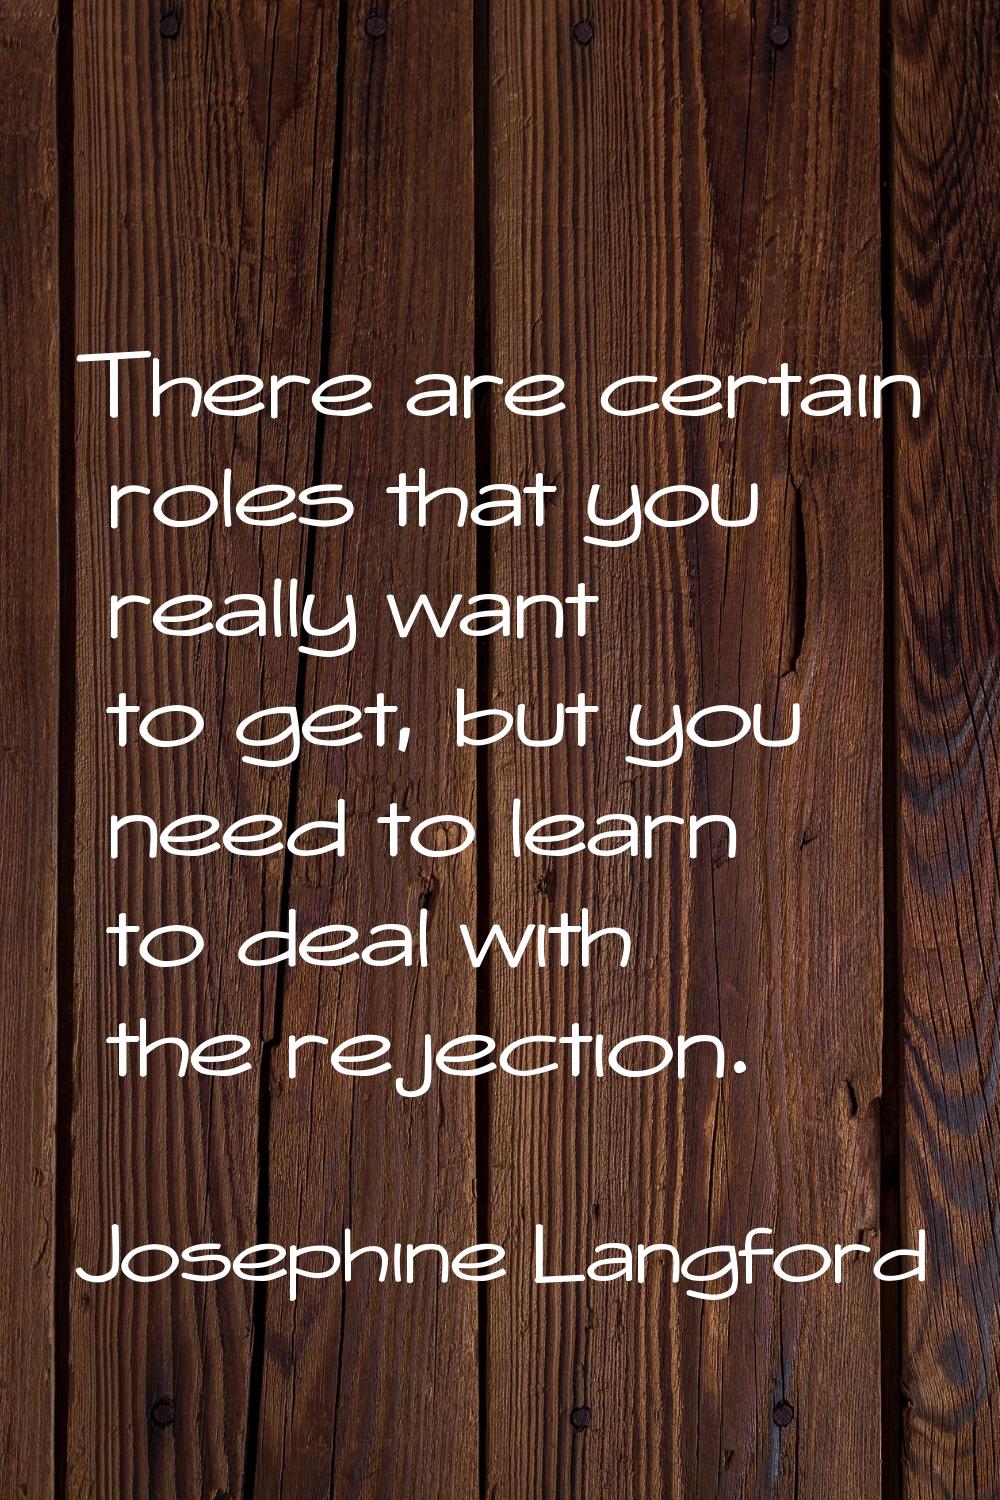 There are certain roles that you really want to get, but you need to learn to deal with the rejecti